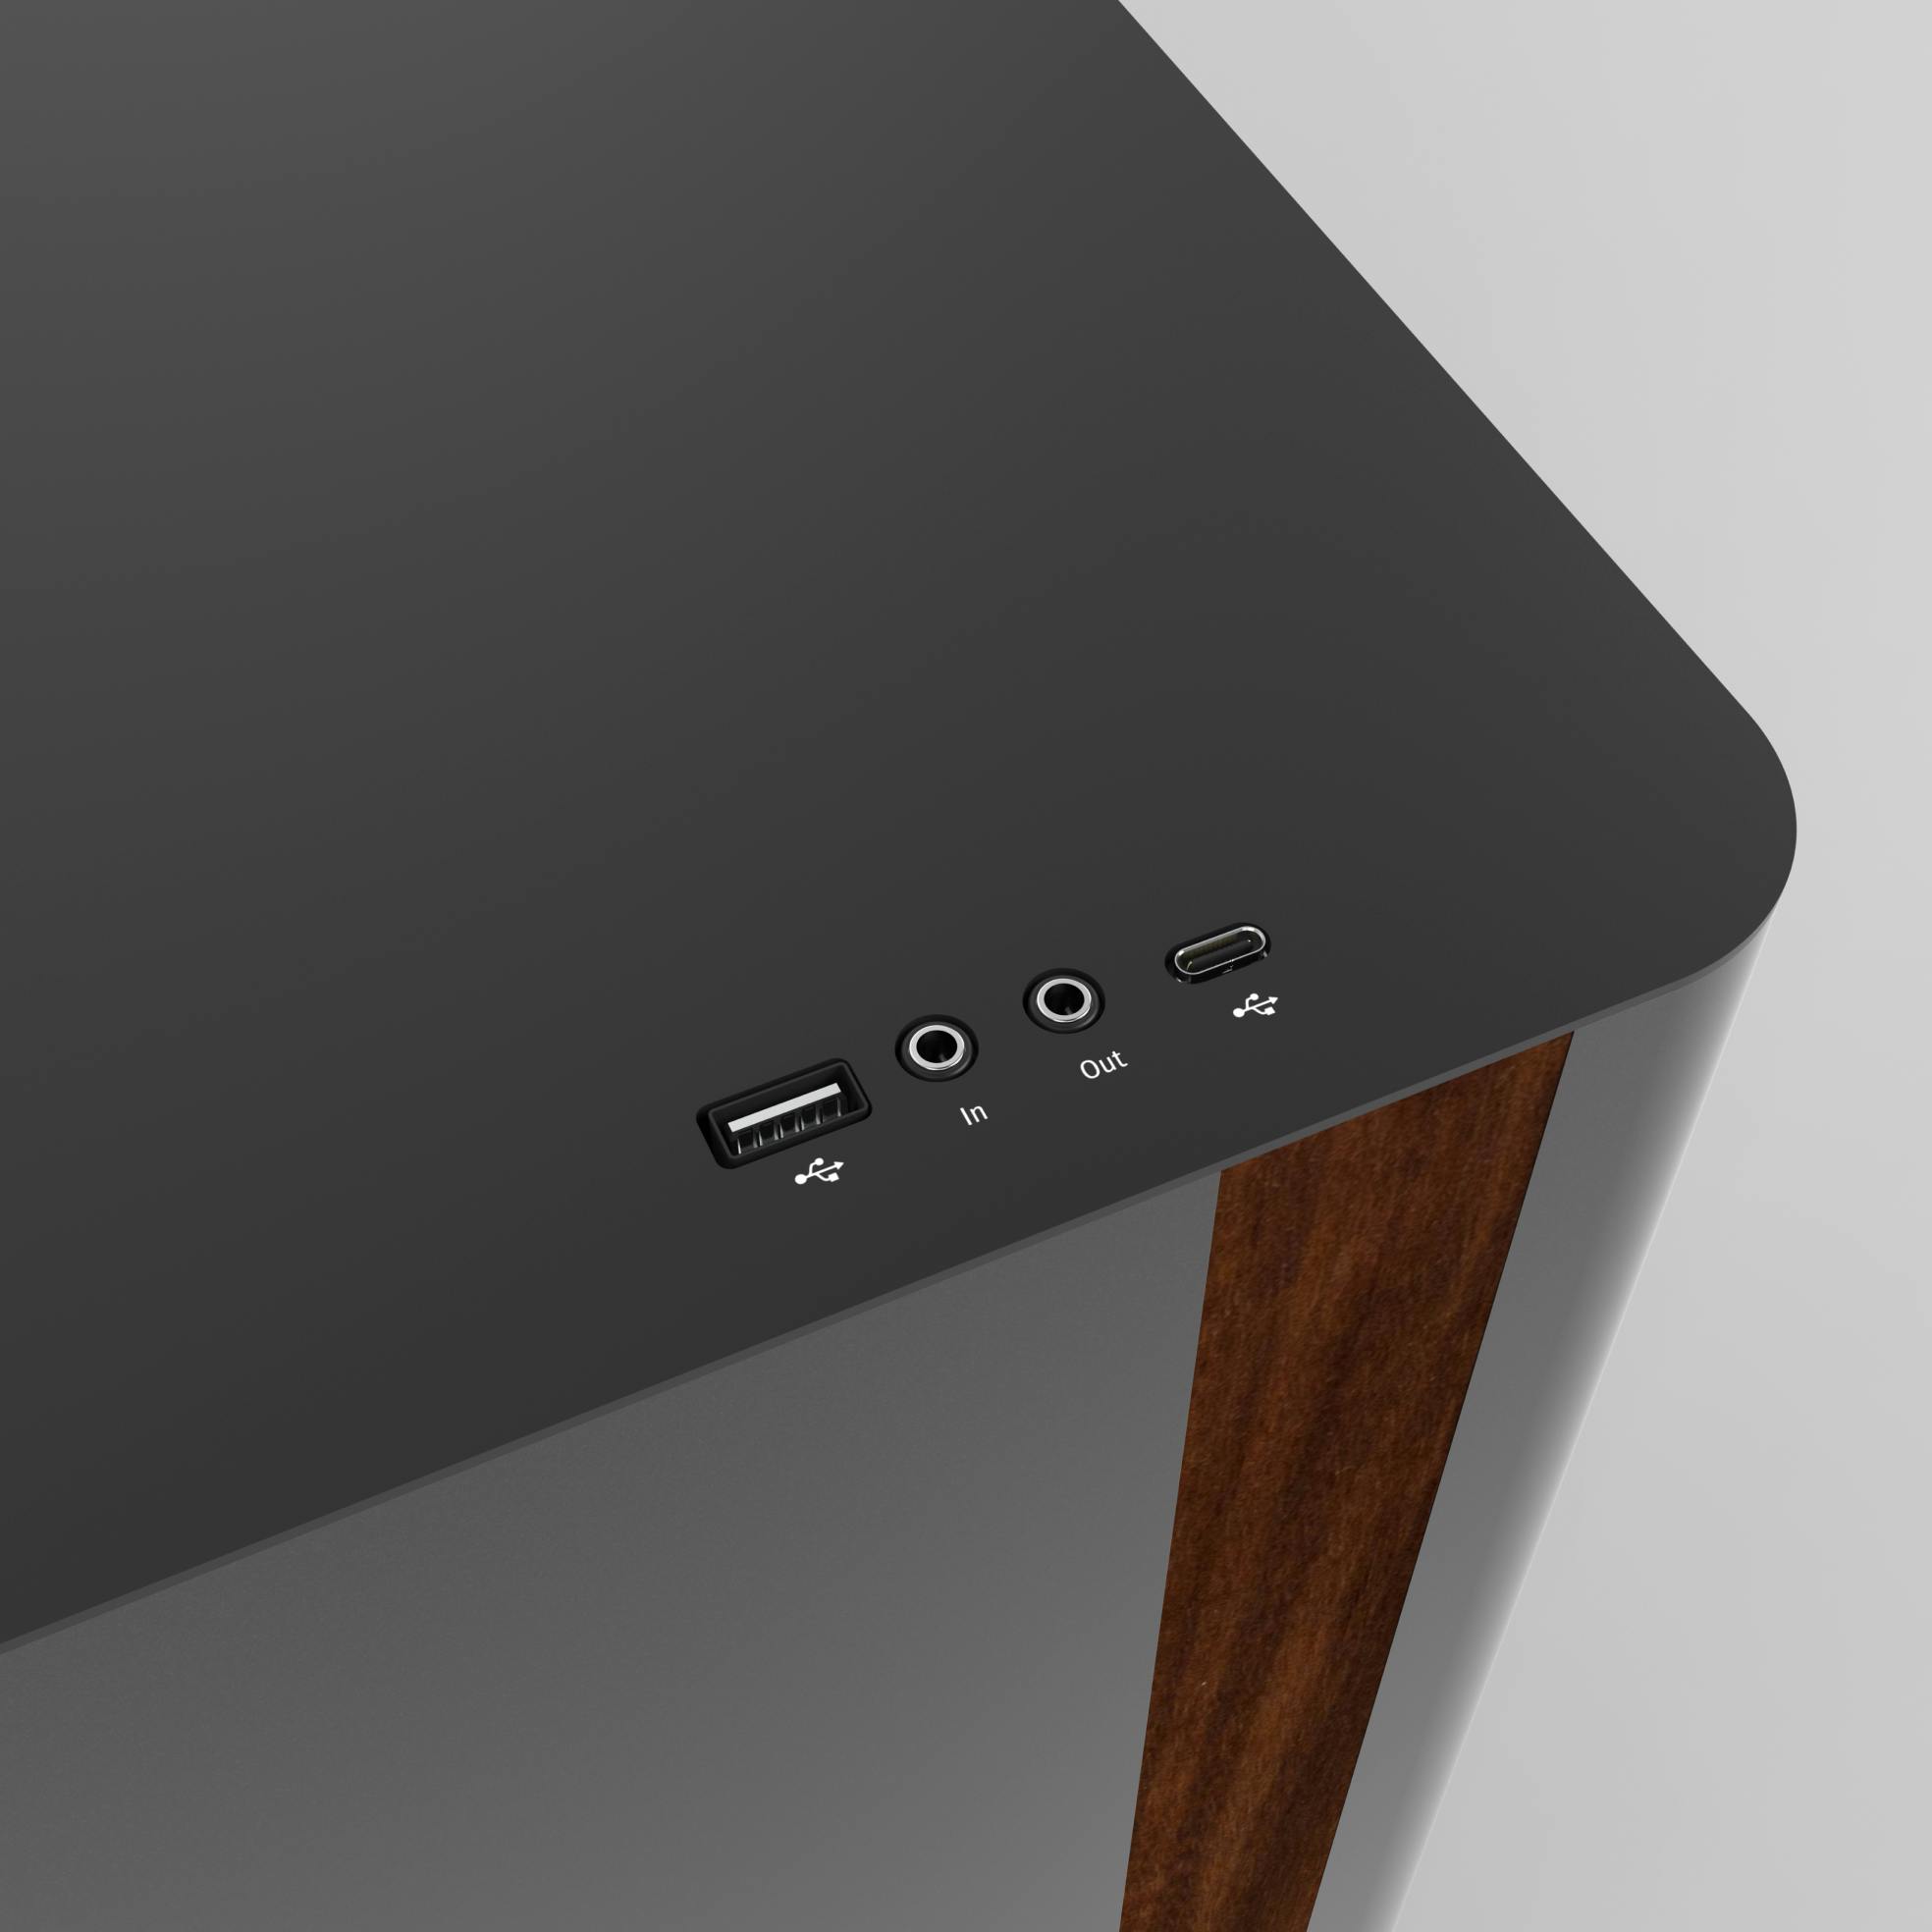 Top ports of Thelio Mega with walnut accent